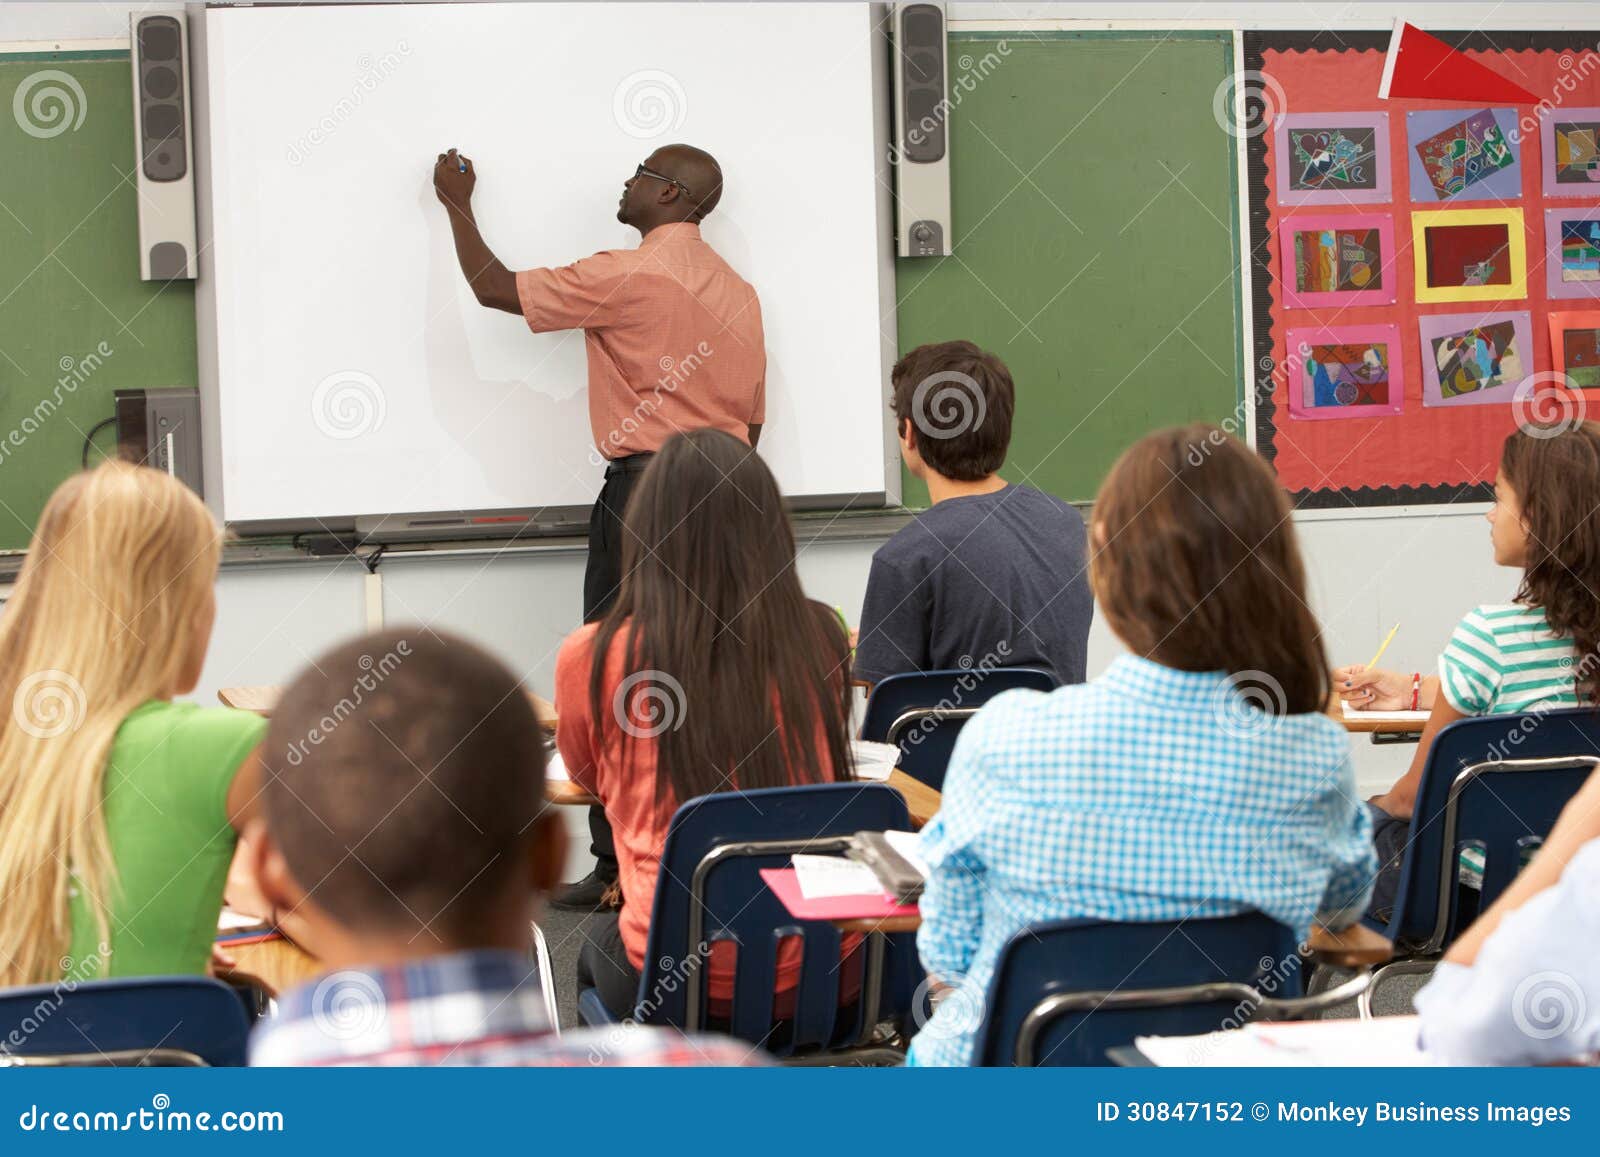 teacher using interactive whiteboard during lesson